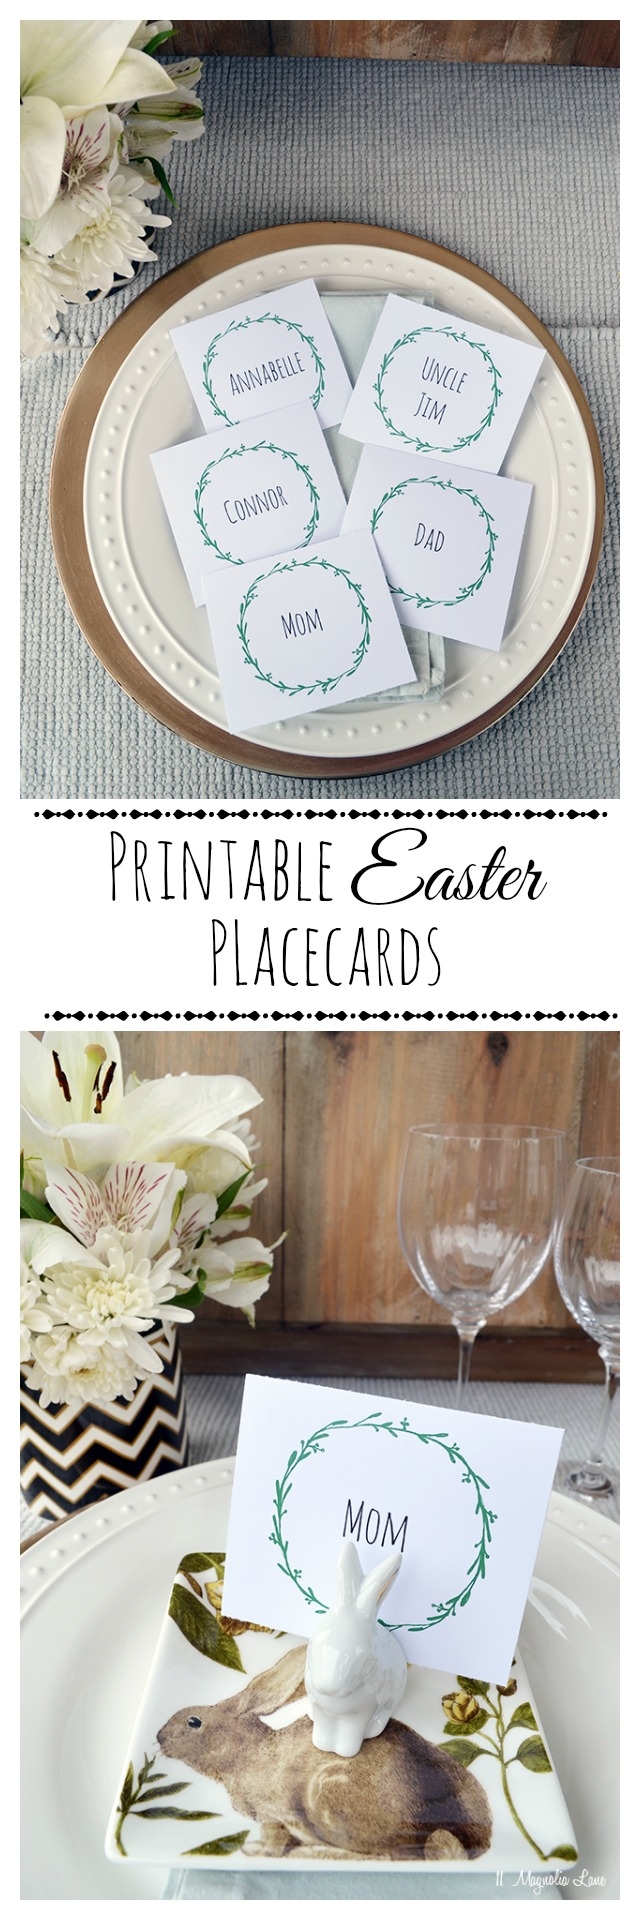 Our Easter Table Free Printable Wreath Place Cards